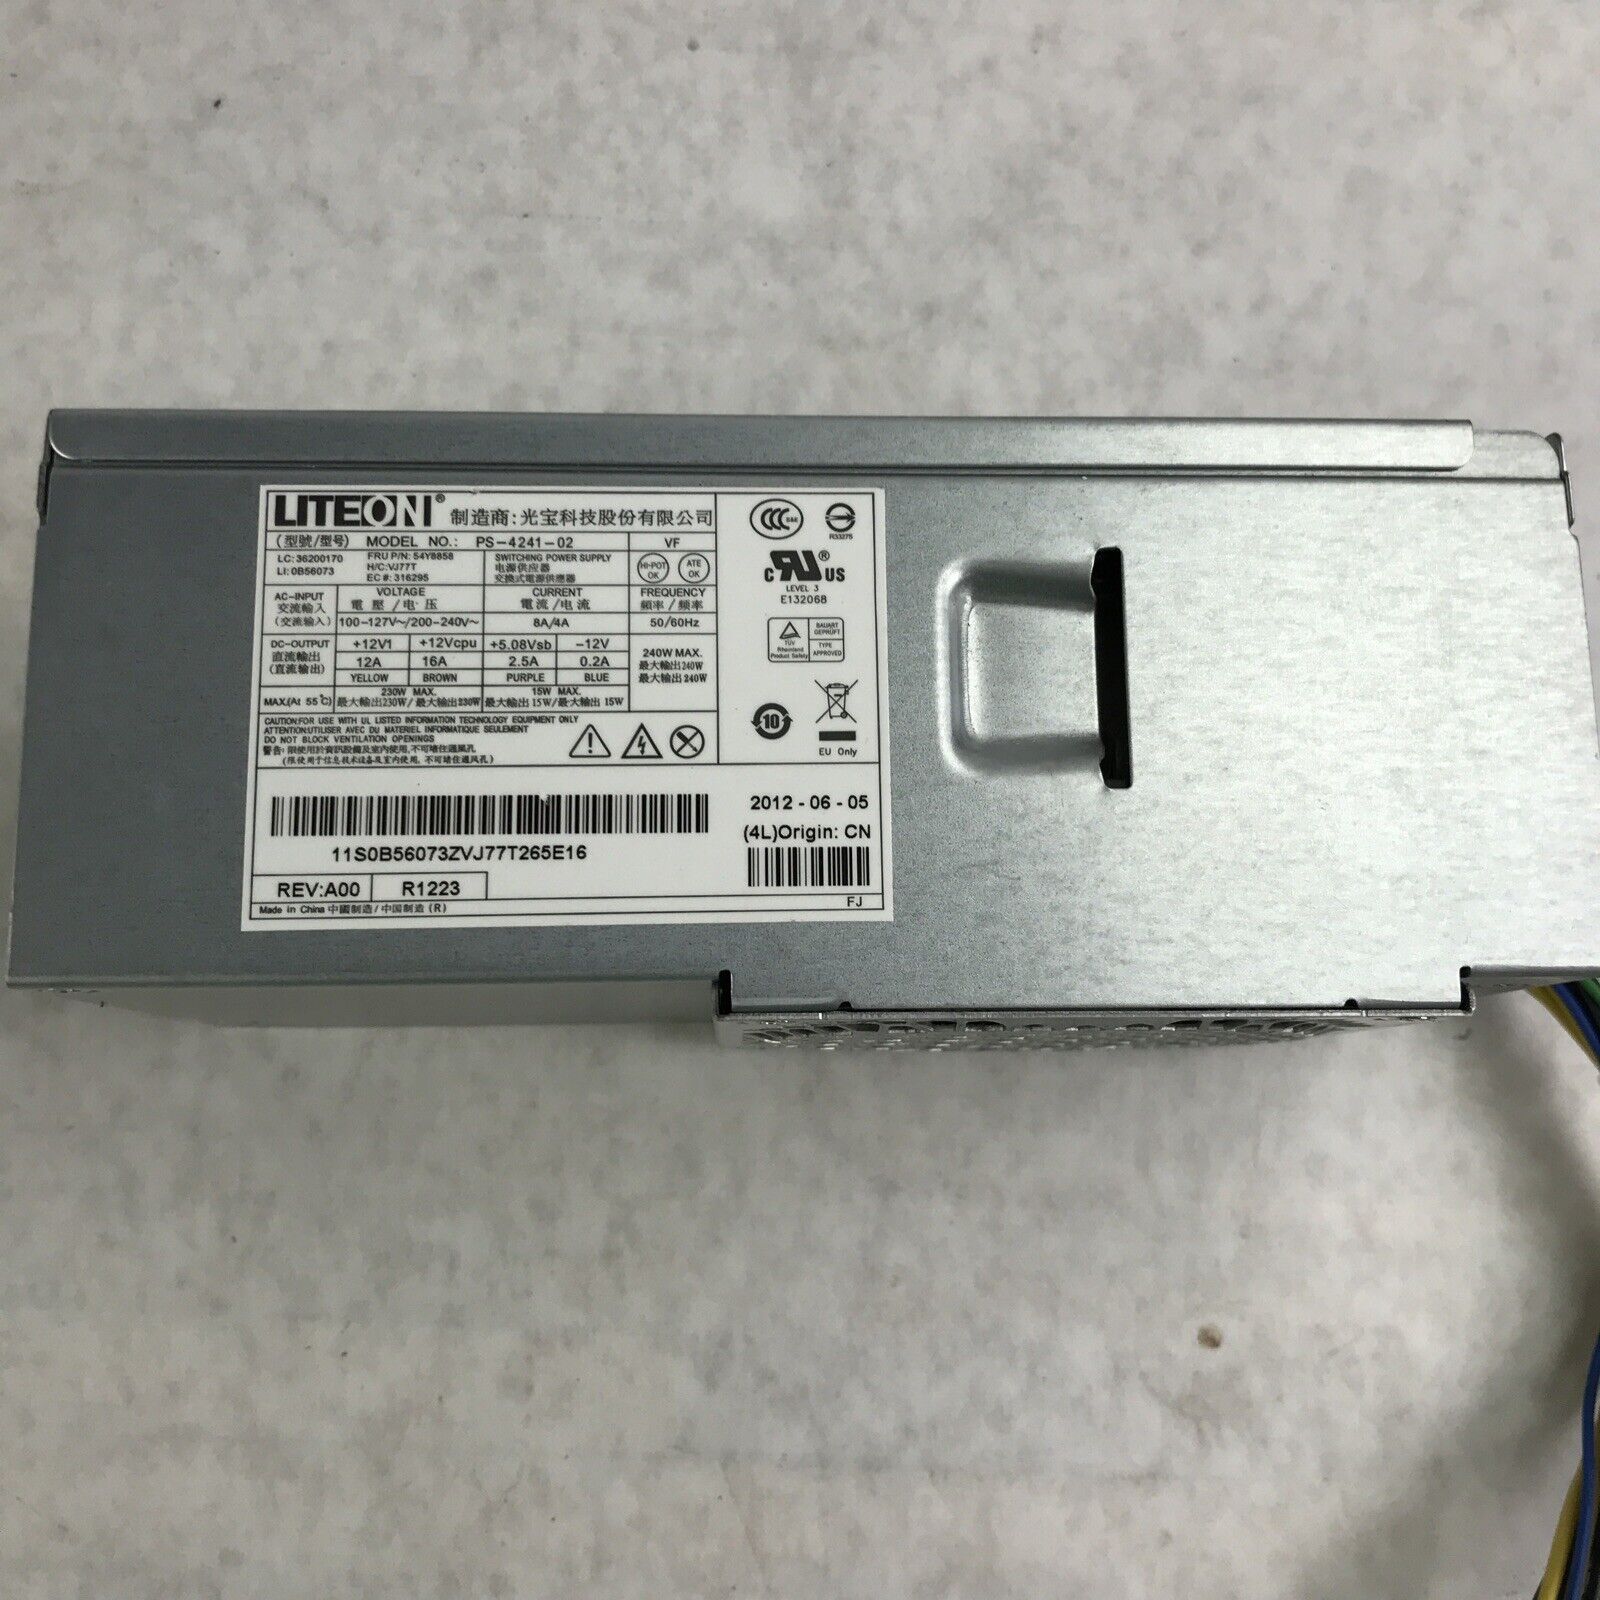 Liteon PS-4241-02 240W 8A 240V 60Hz Switching Power Supply 54Y8858